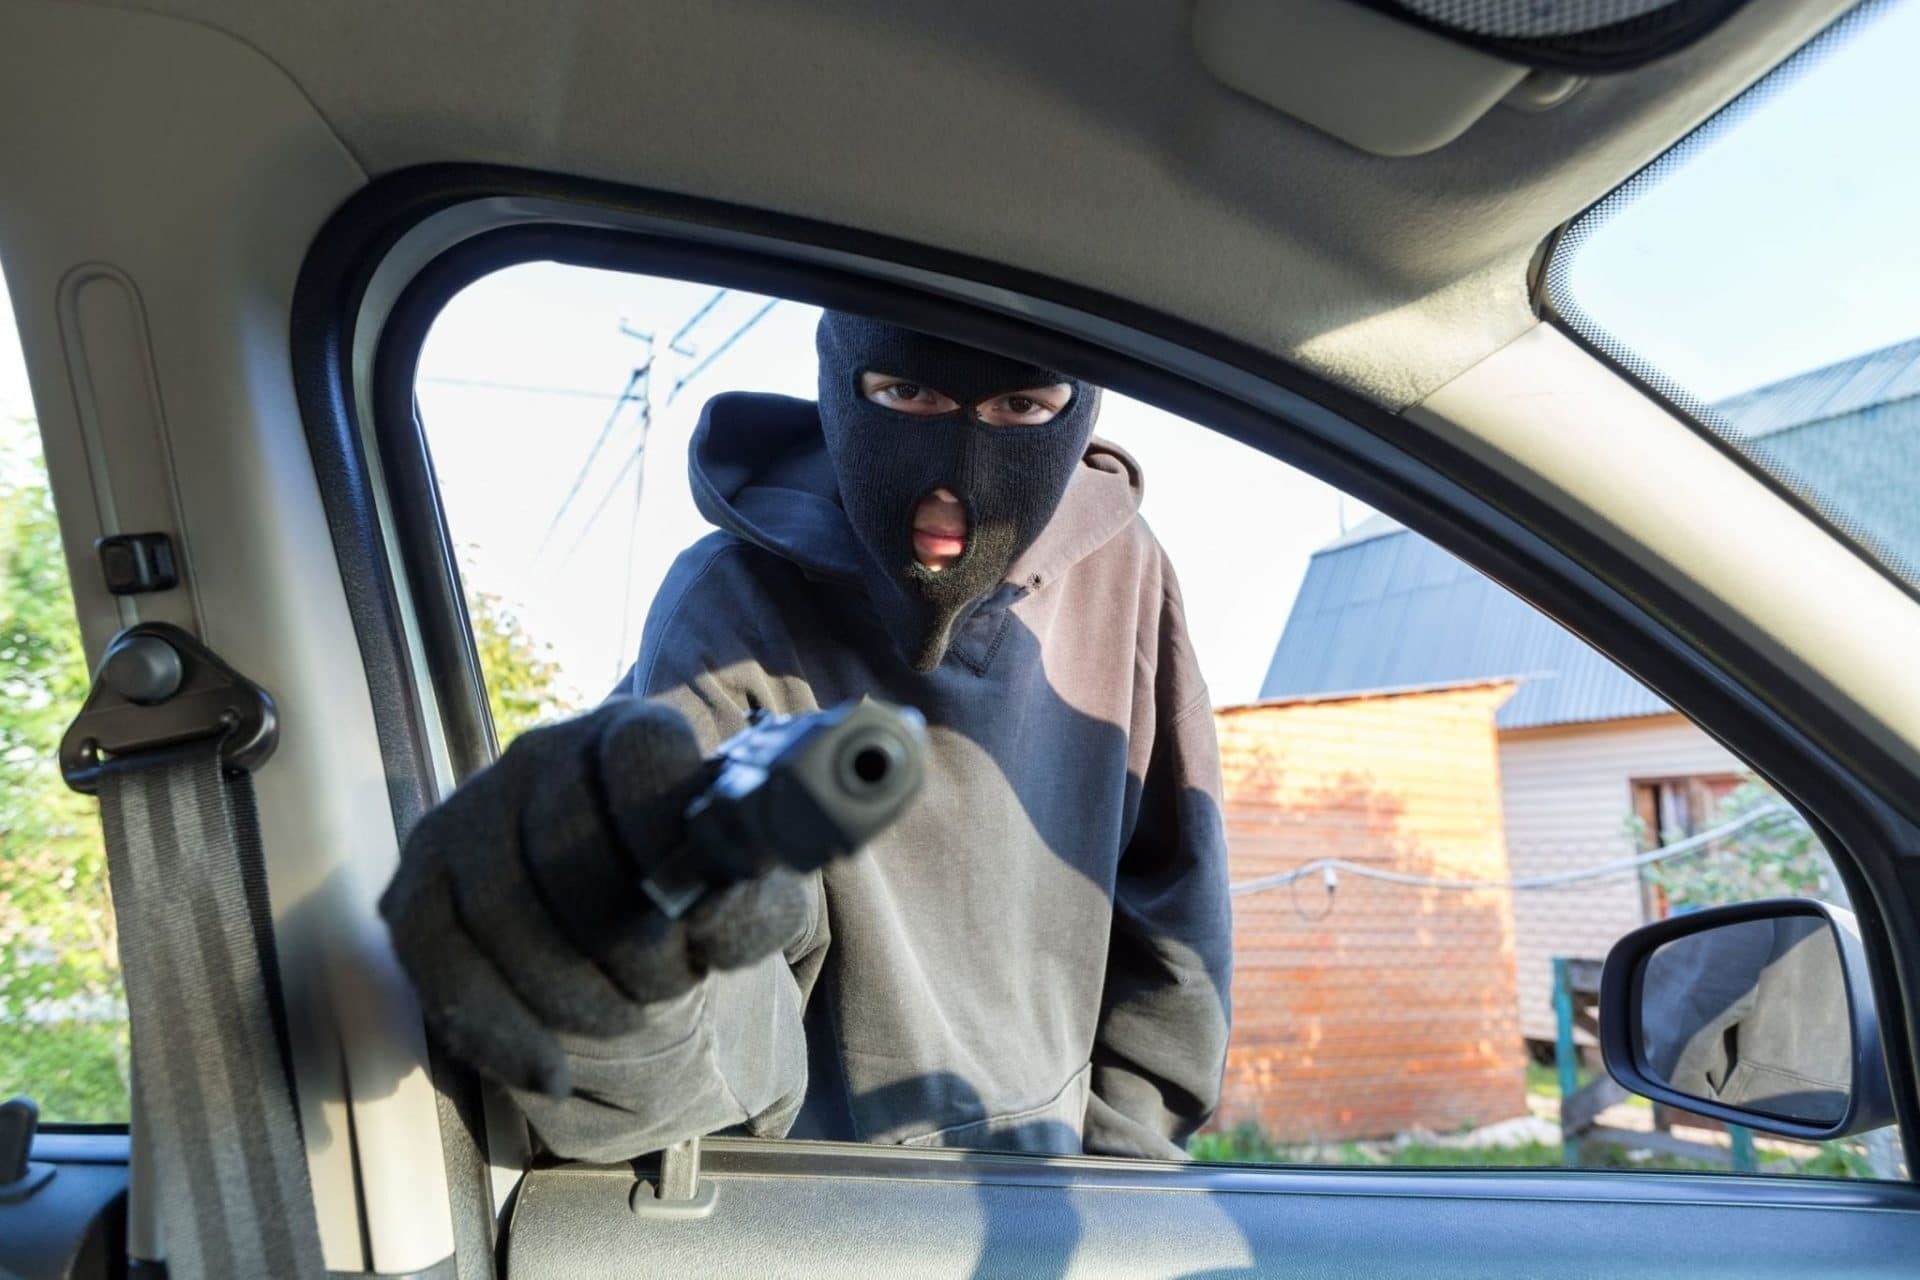 Vehicular Hijacking - Aggravated Vehicular Hijacking in Chicago